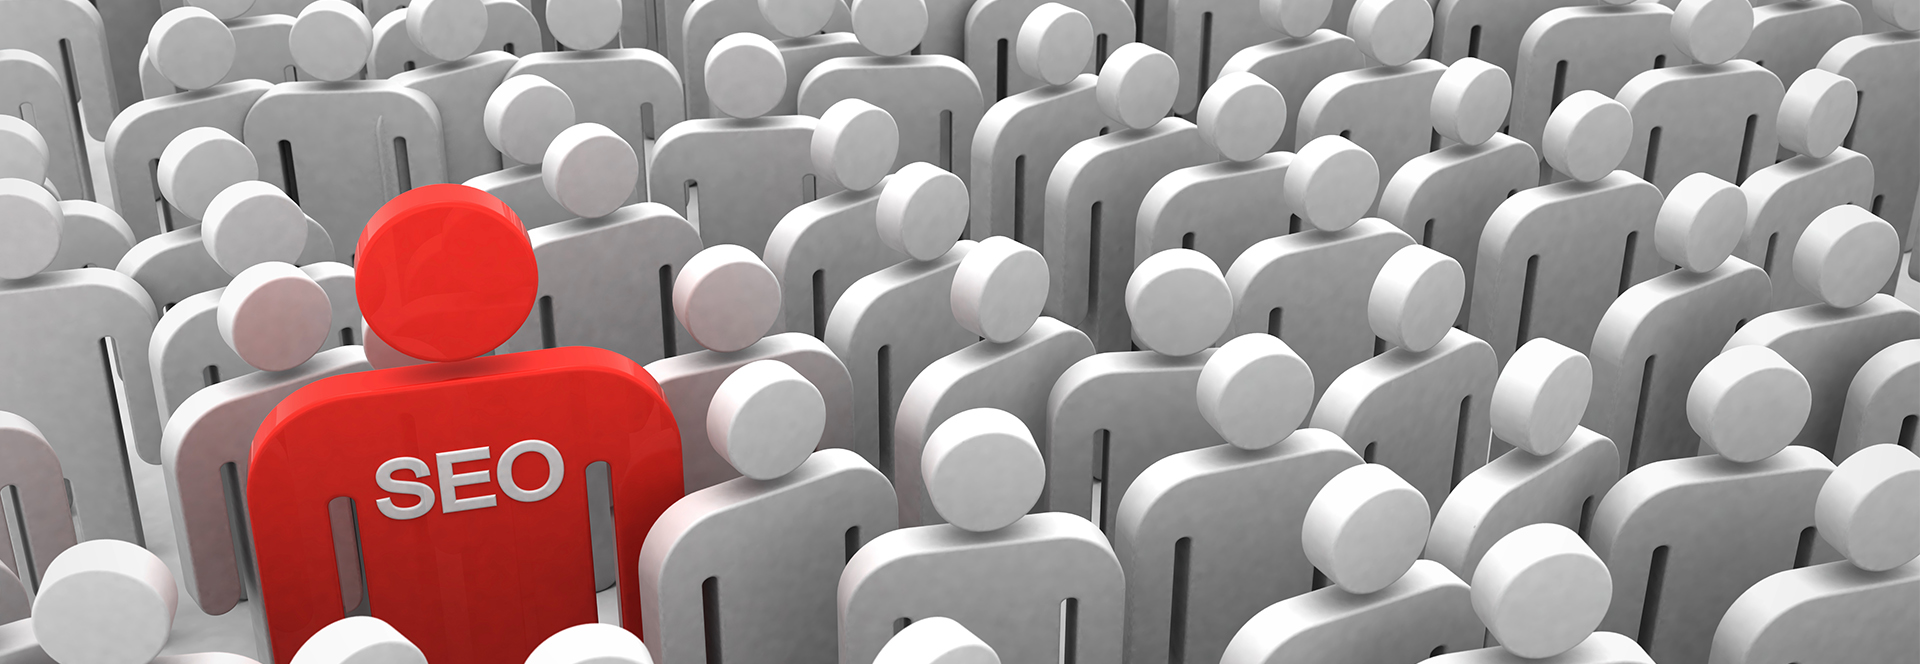 stand out from the crowd with seo